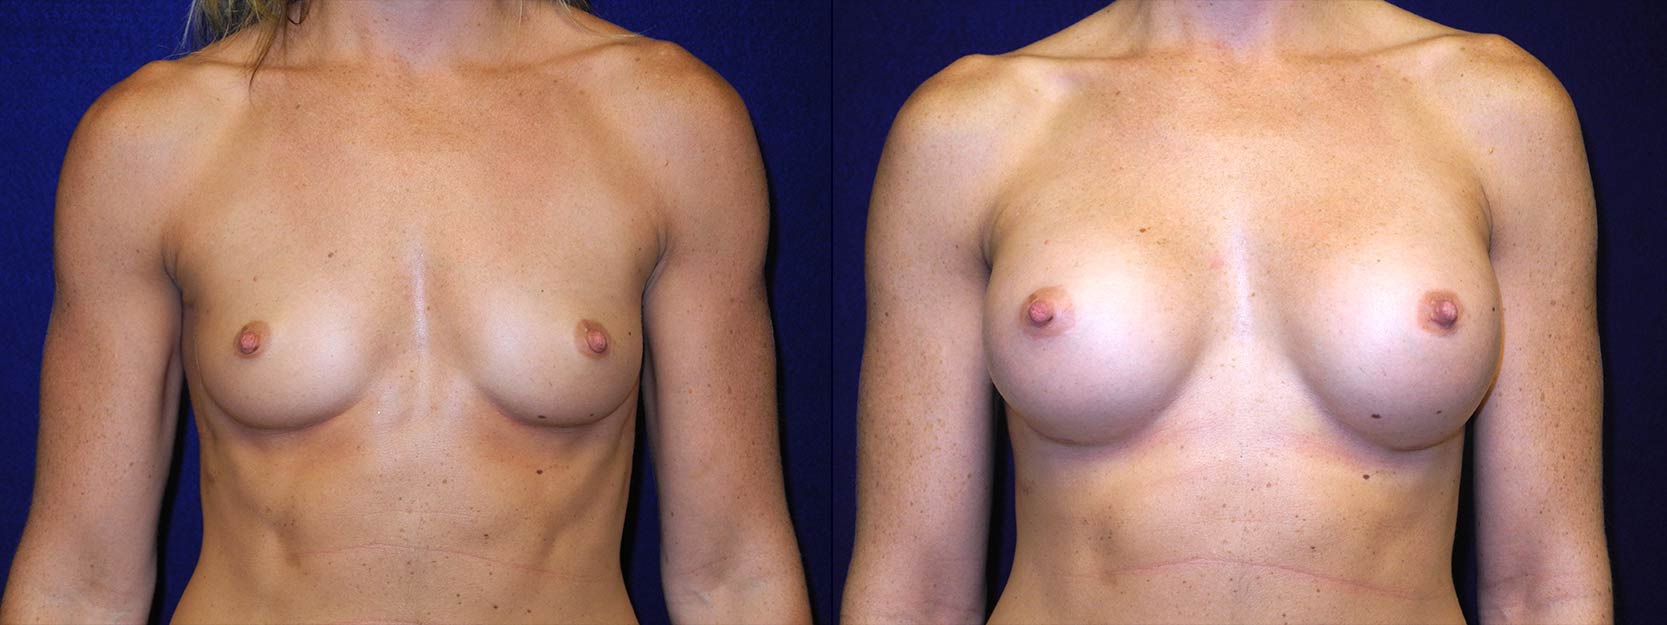 Frontal View - Breast Augmentation - Silicone Implants